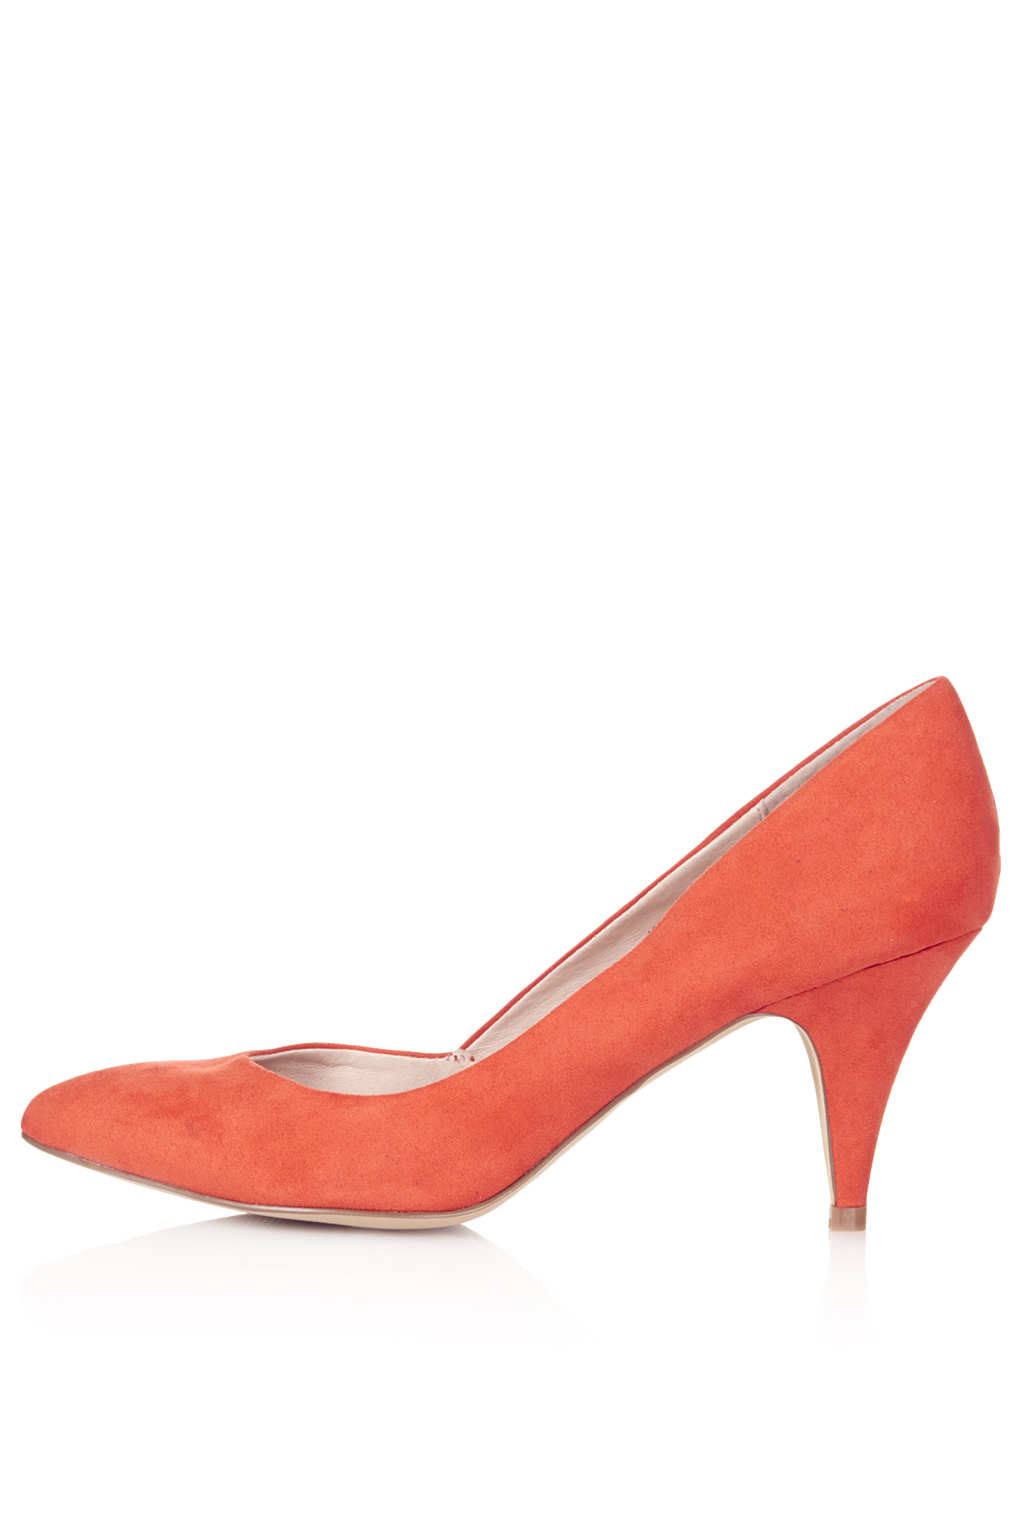 coral mid heel shoes